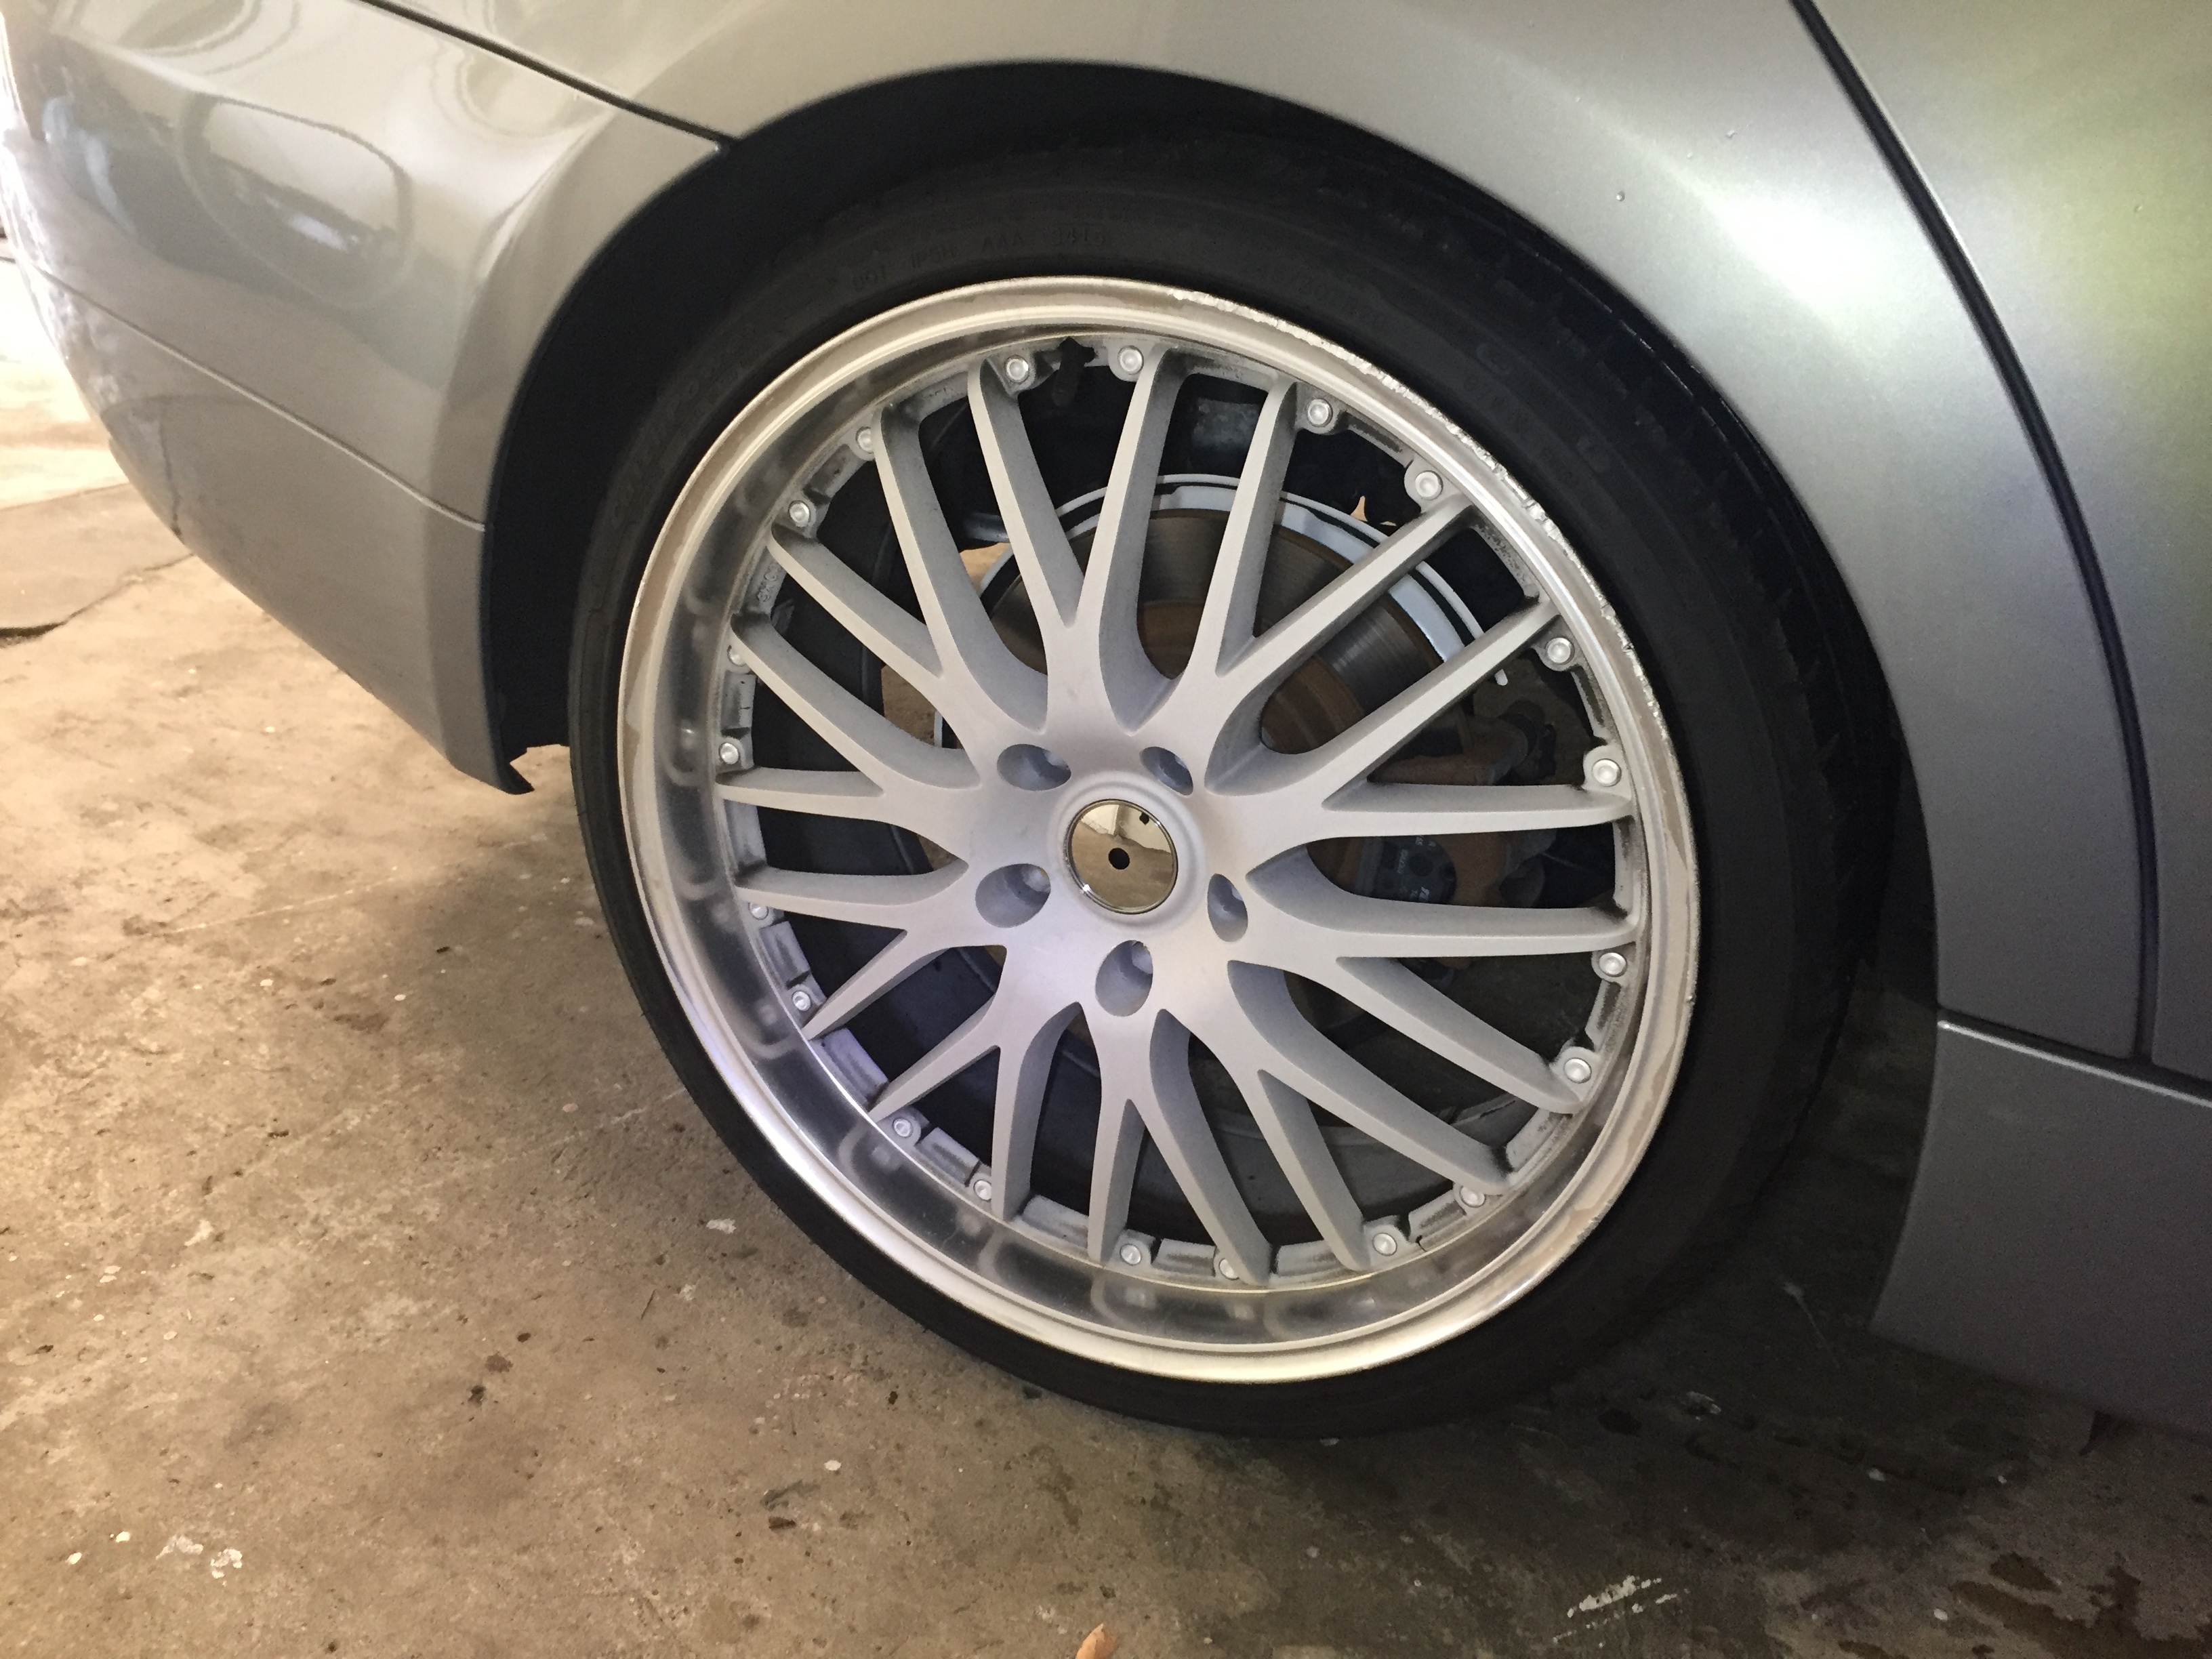 BMW 3 Series 20INCH Wheels and Tyres,90% Tread